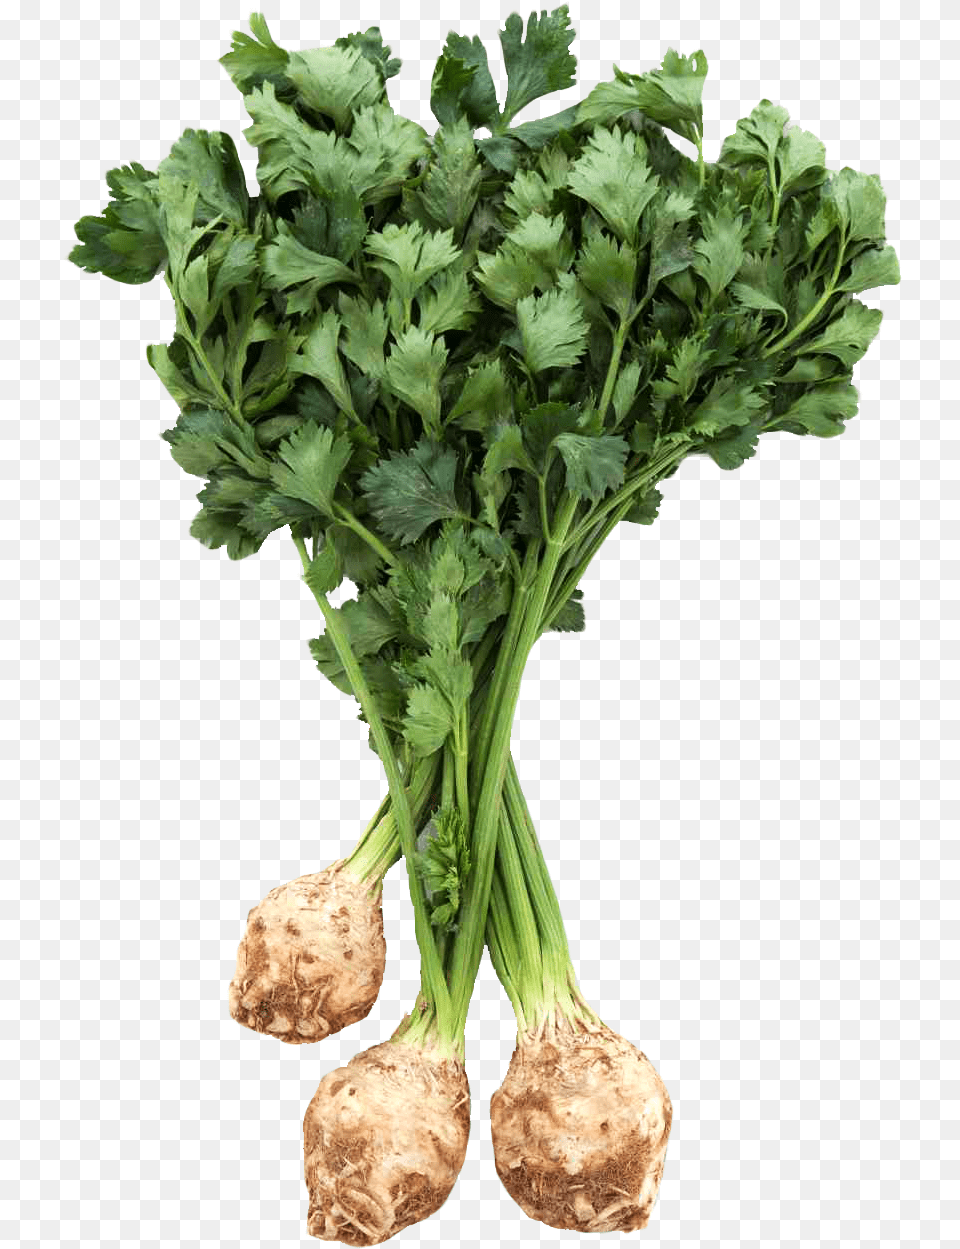 Download Fresh Celery Root With Leaves For Celery Root, Plant, Herbs, Food Png Image